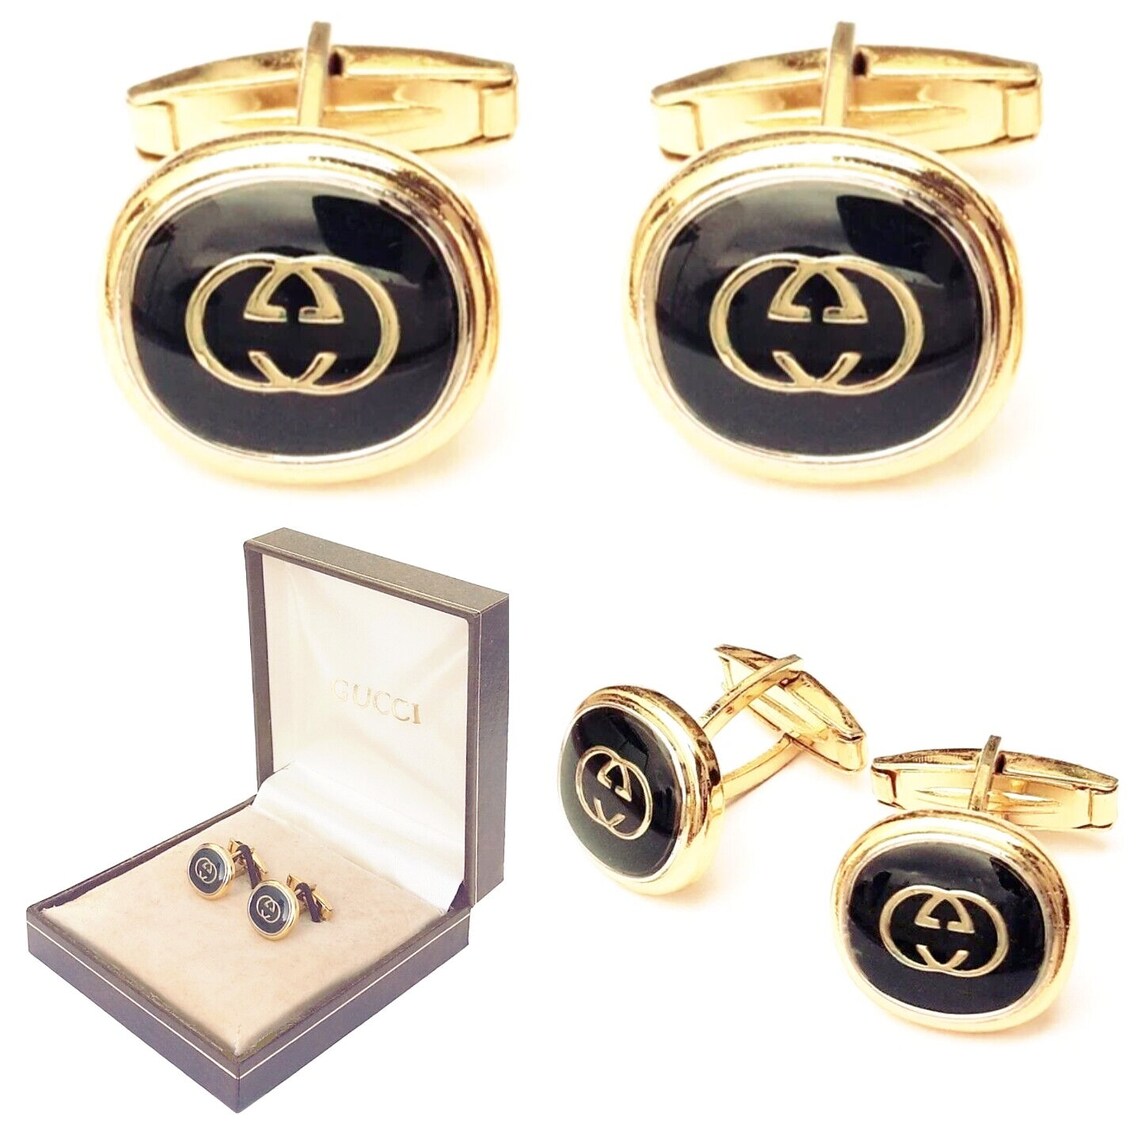 #Gucci #cufflinks 1970s NEW #vintage - Black/Gold - GG-Motif - Hallmarked - #mengifts #etsygifts Cuff Links #Etsy t.ly/tCdQ3